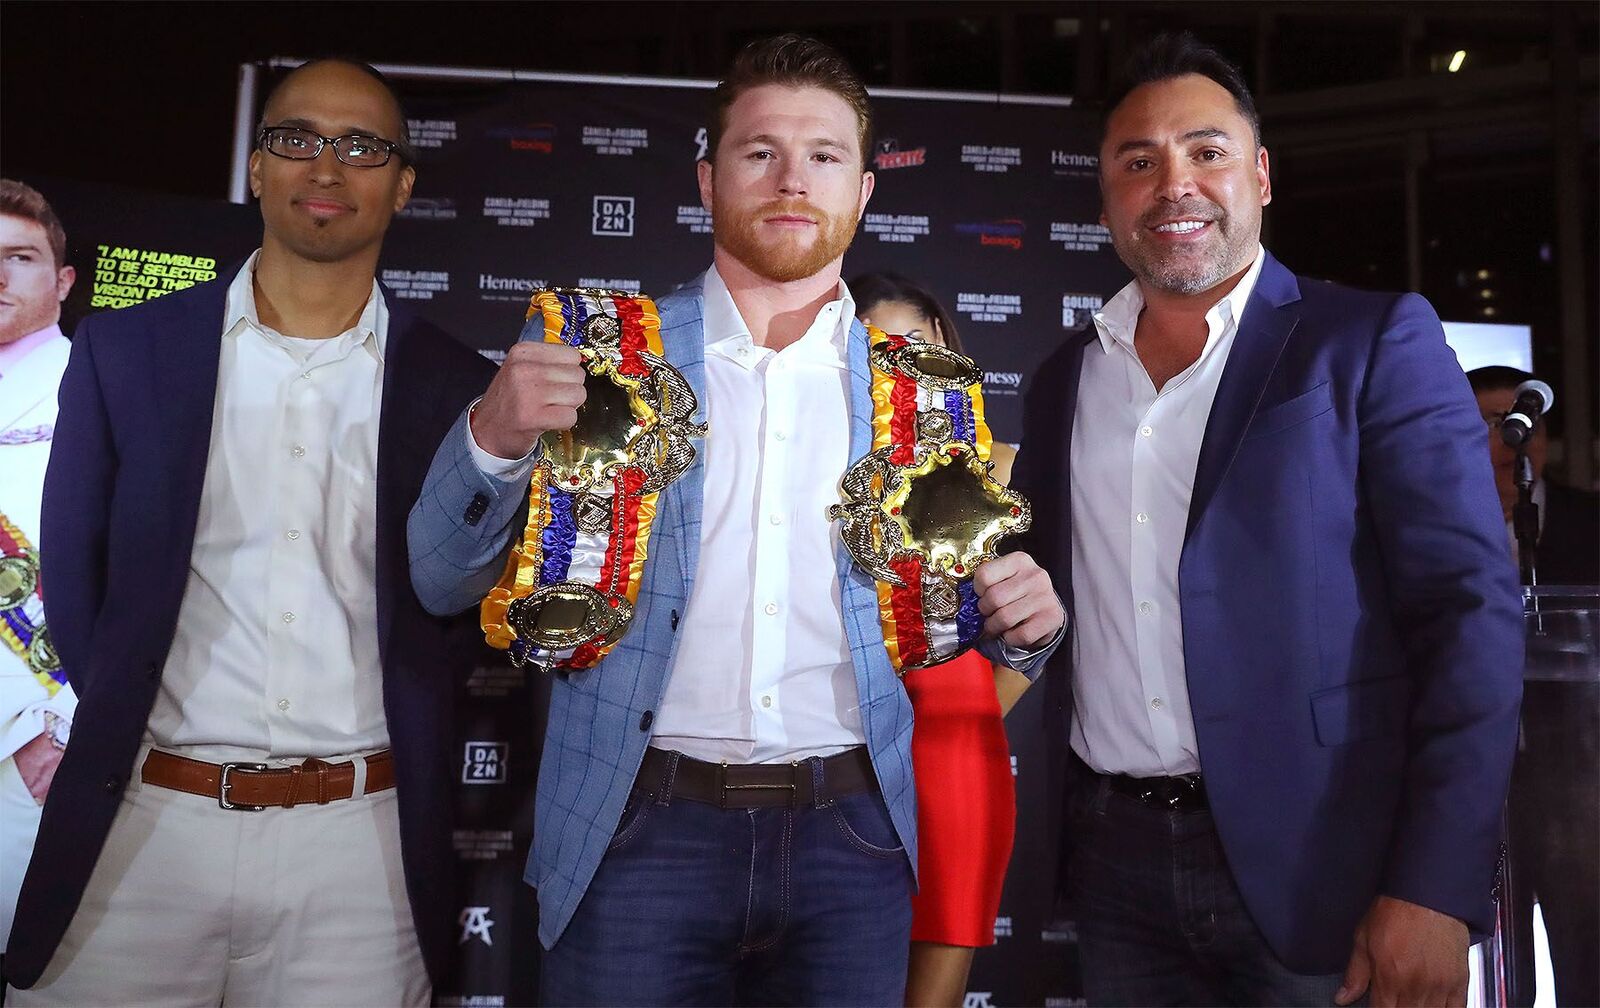 (From left to right) The Ring Magazine Editor-in-Chief Doug Fischer, world middleweight champion Canelo Alvarez and Golden Boy Promotions founder Oscar De La Hoya. Photo Credit: Tom Hogan/HoganPhotos/Golden Boy Promotions